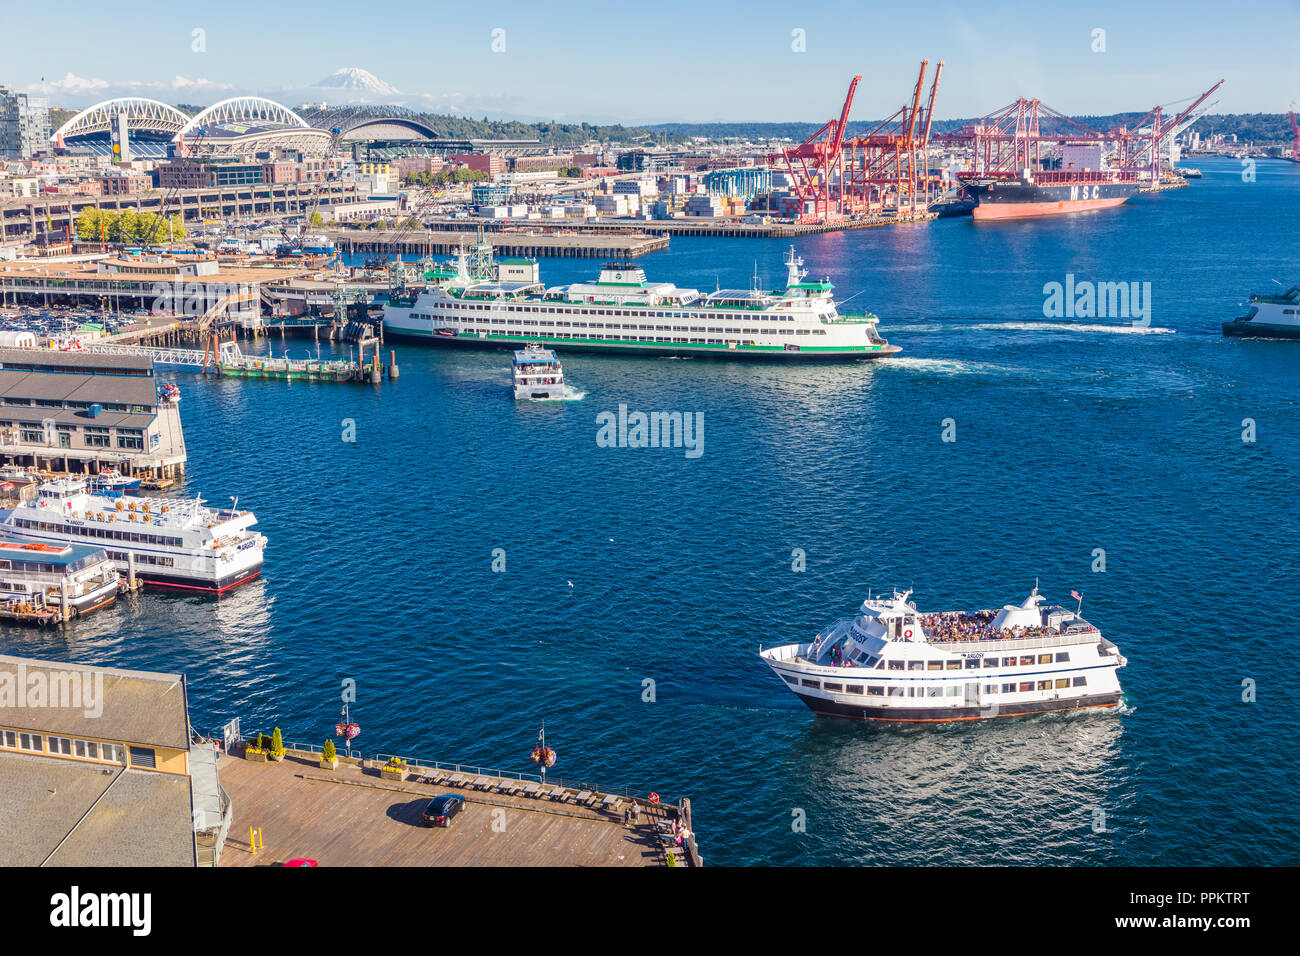 Aerial view of ferries and waterfront harbor area of Seattle Washington, UNited States Stock Photo